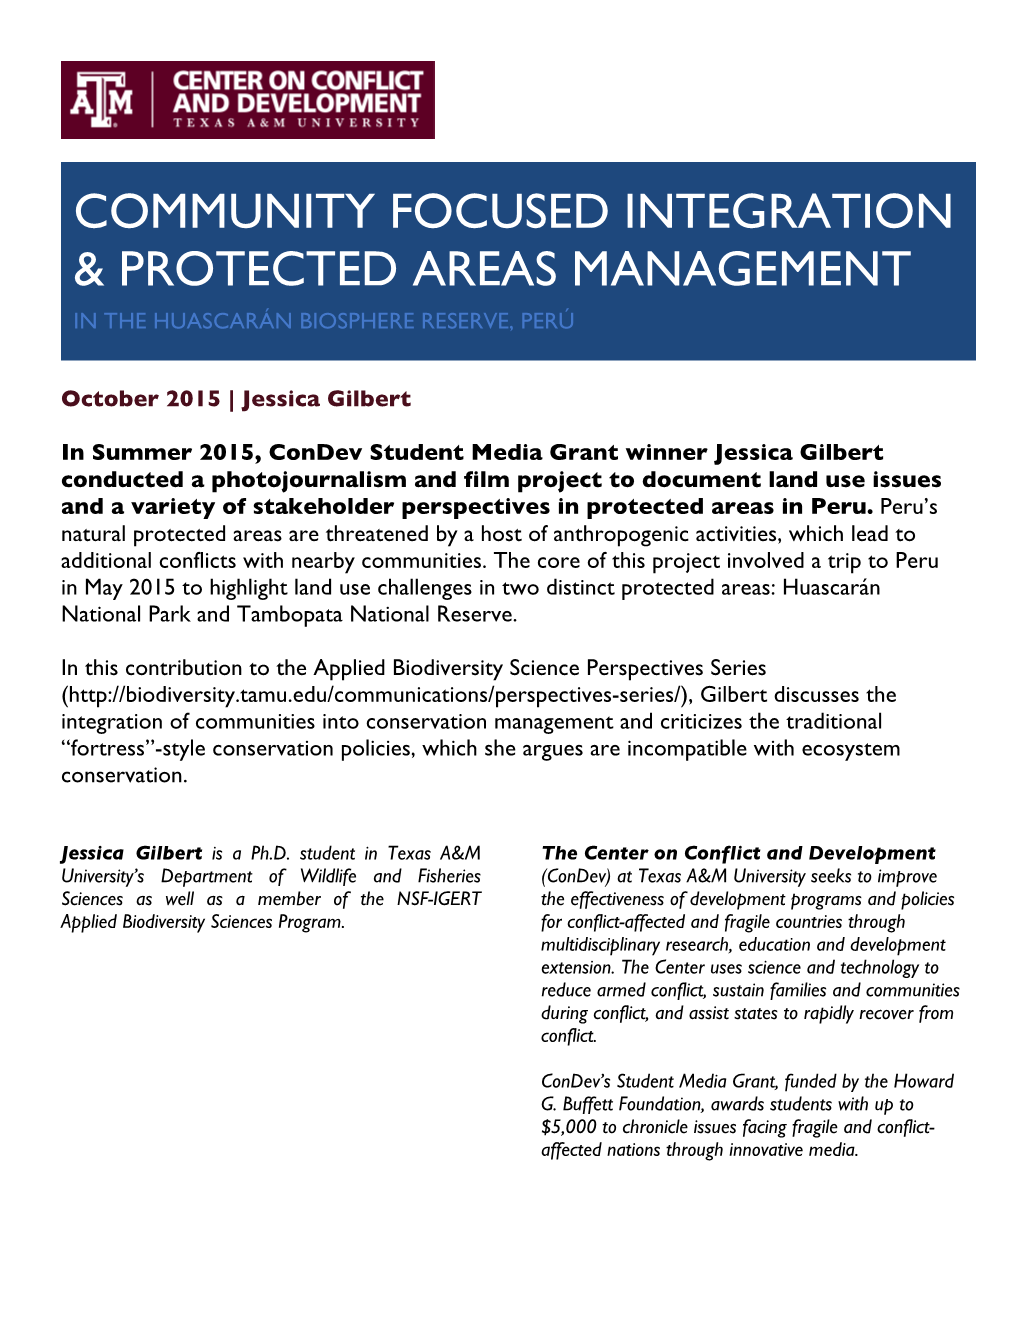 Community Focused Integration & Protected